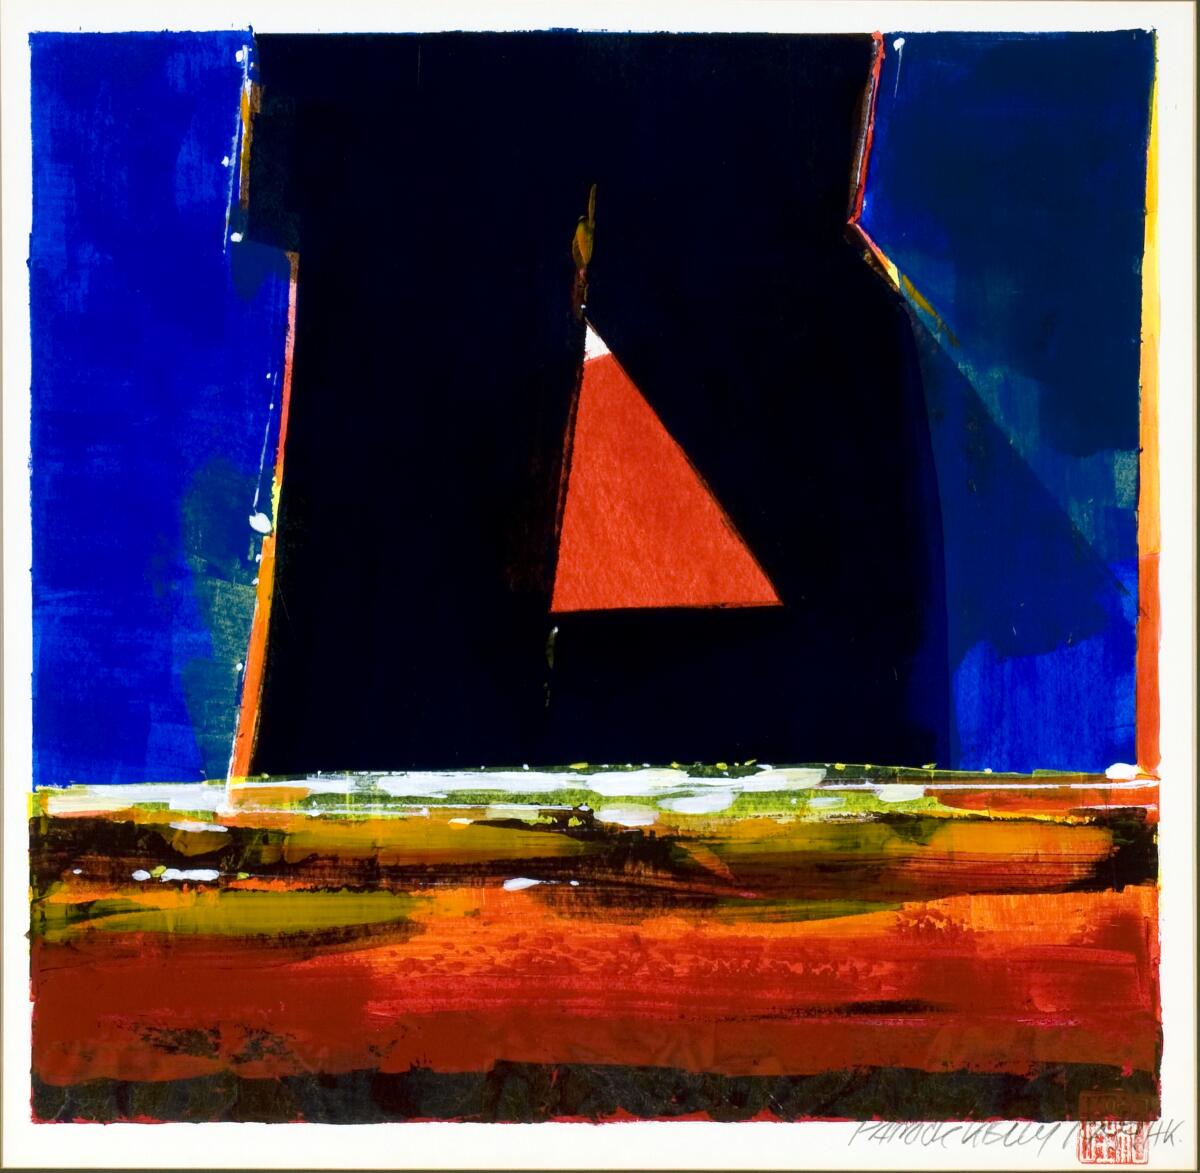 Patrick Kelly's painting "Monolith," which is in the Festival of Arts' permanent collection.